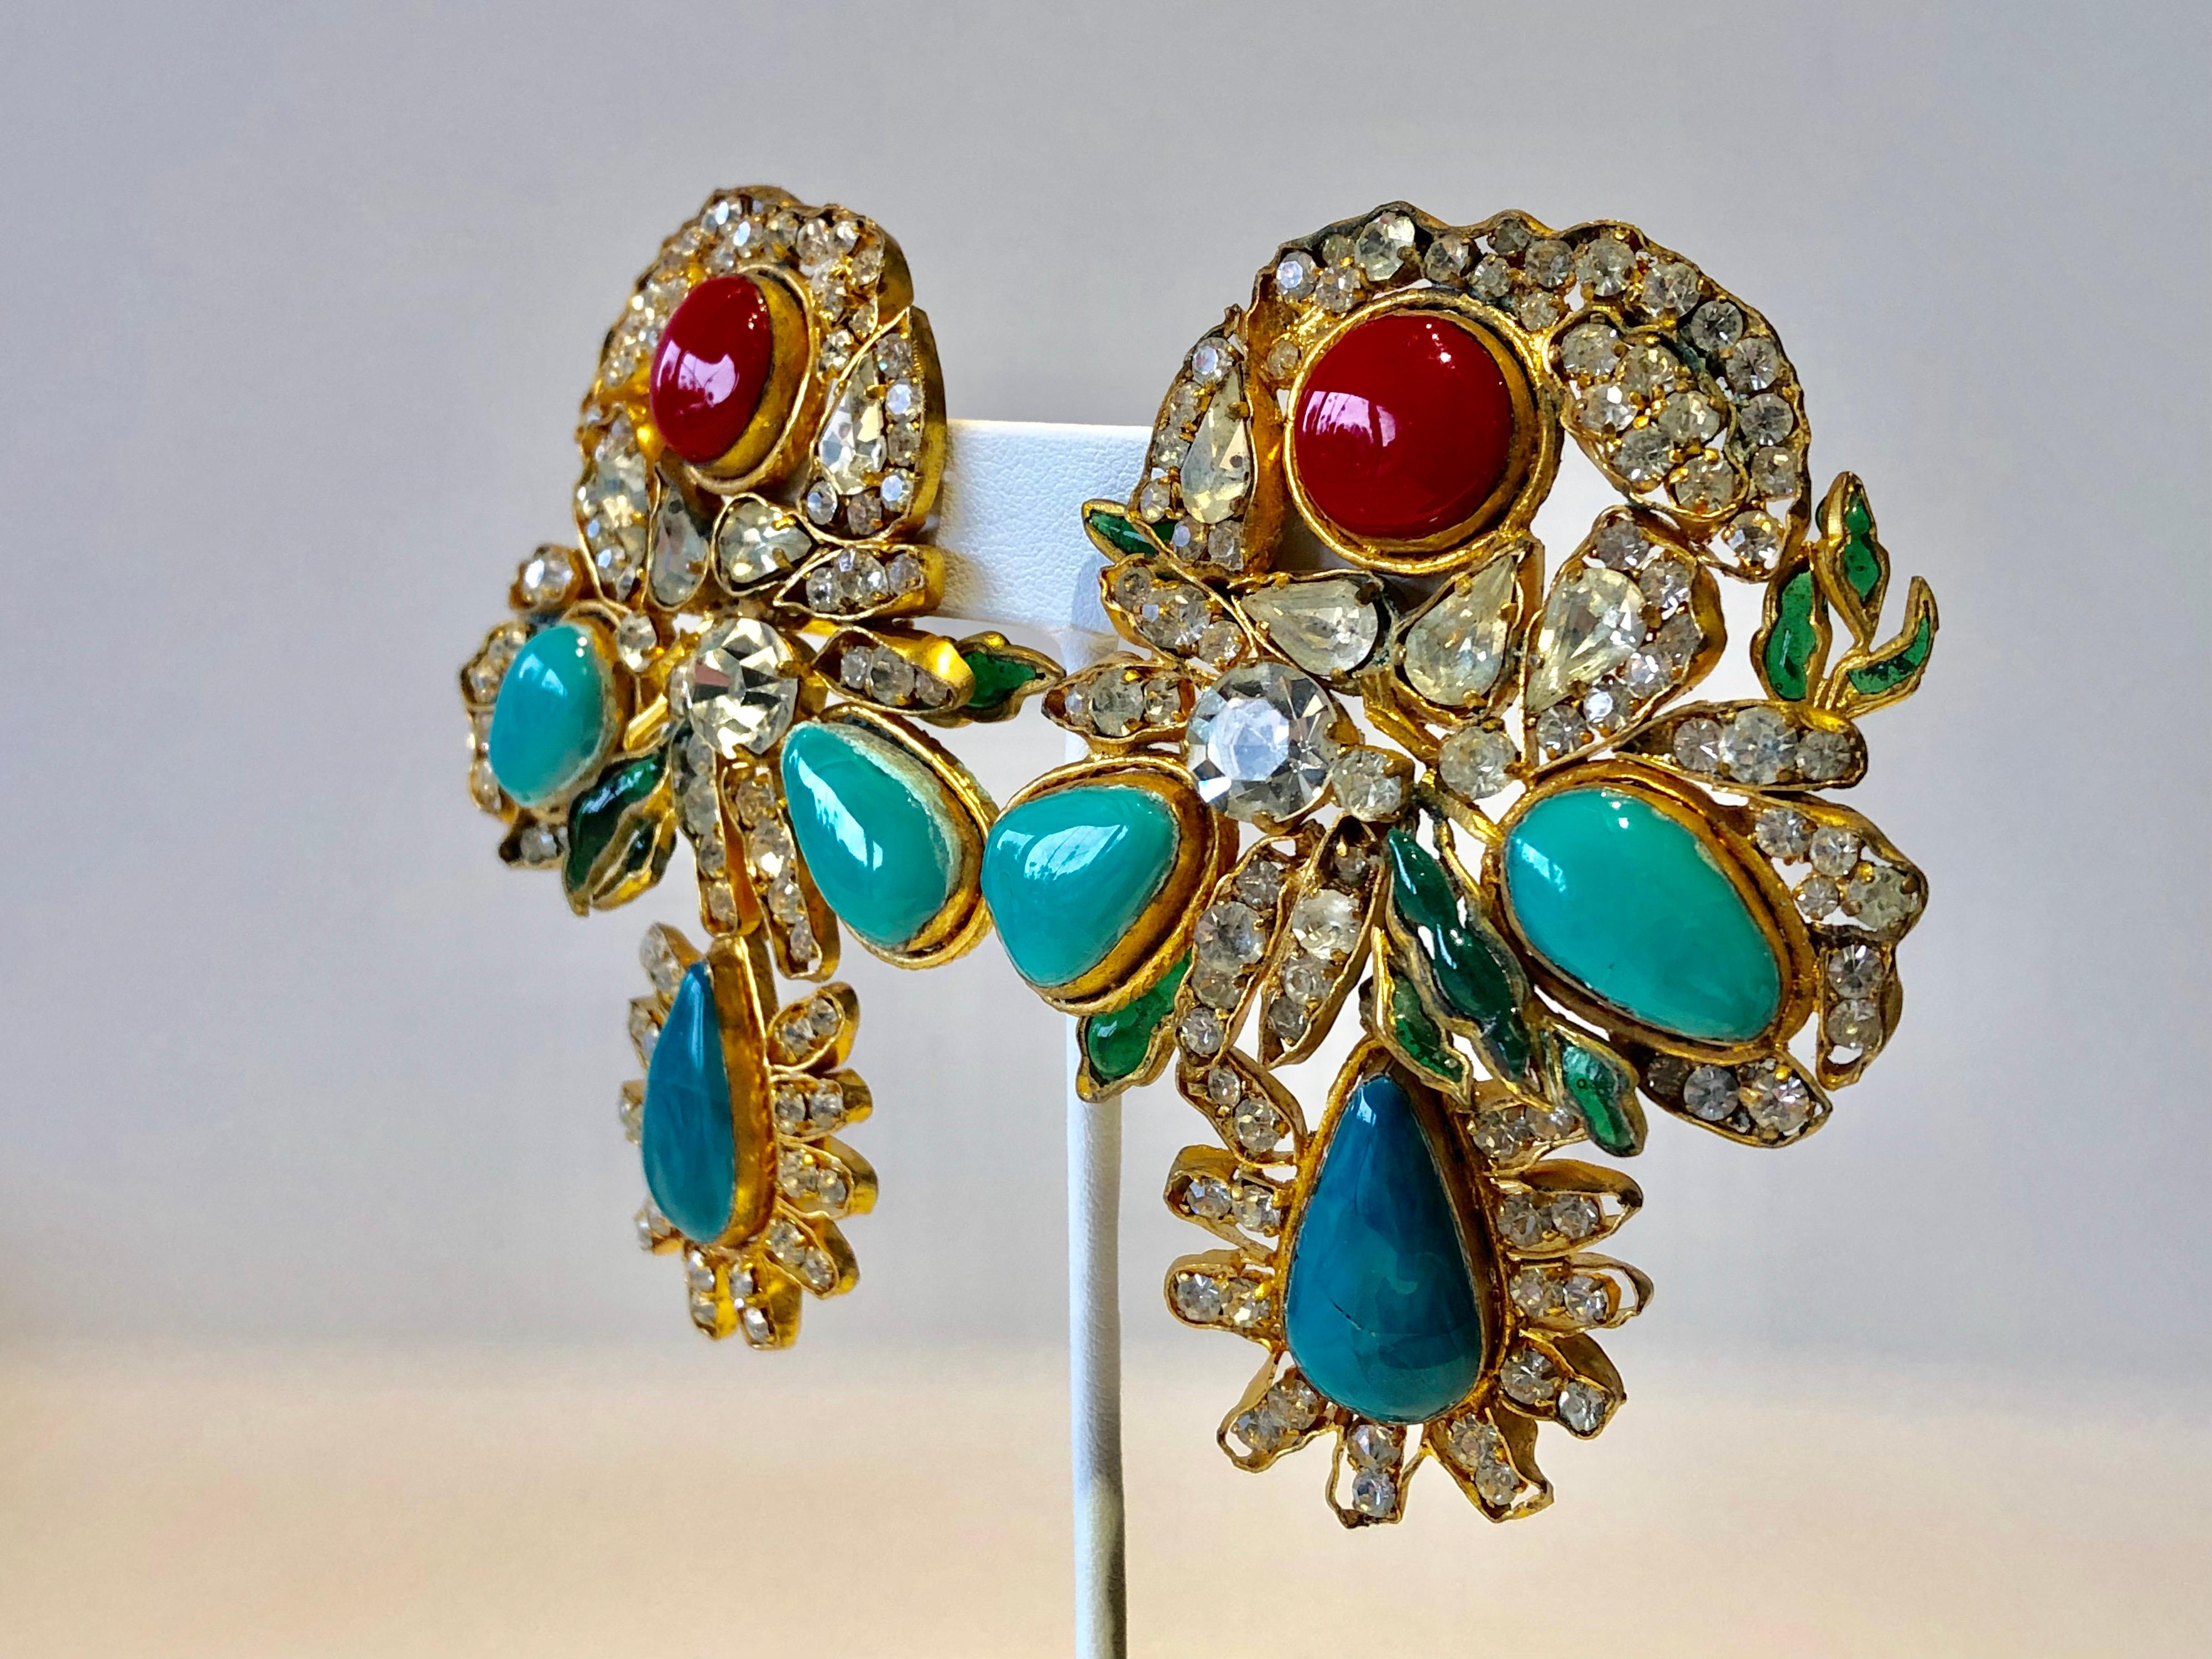 Vintage Yves Saint Laurent Haute Couture Mughal Statement Earrings  4